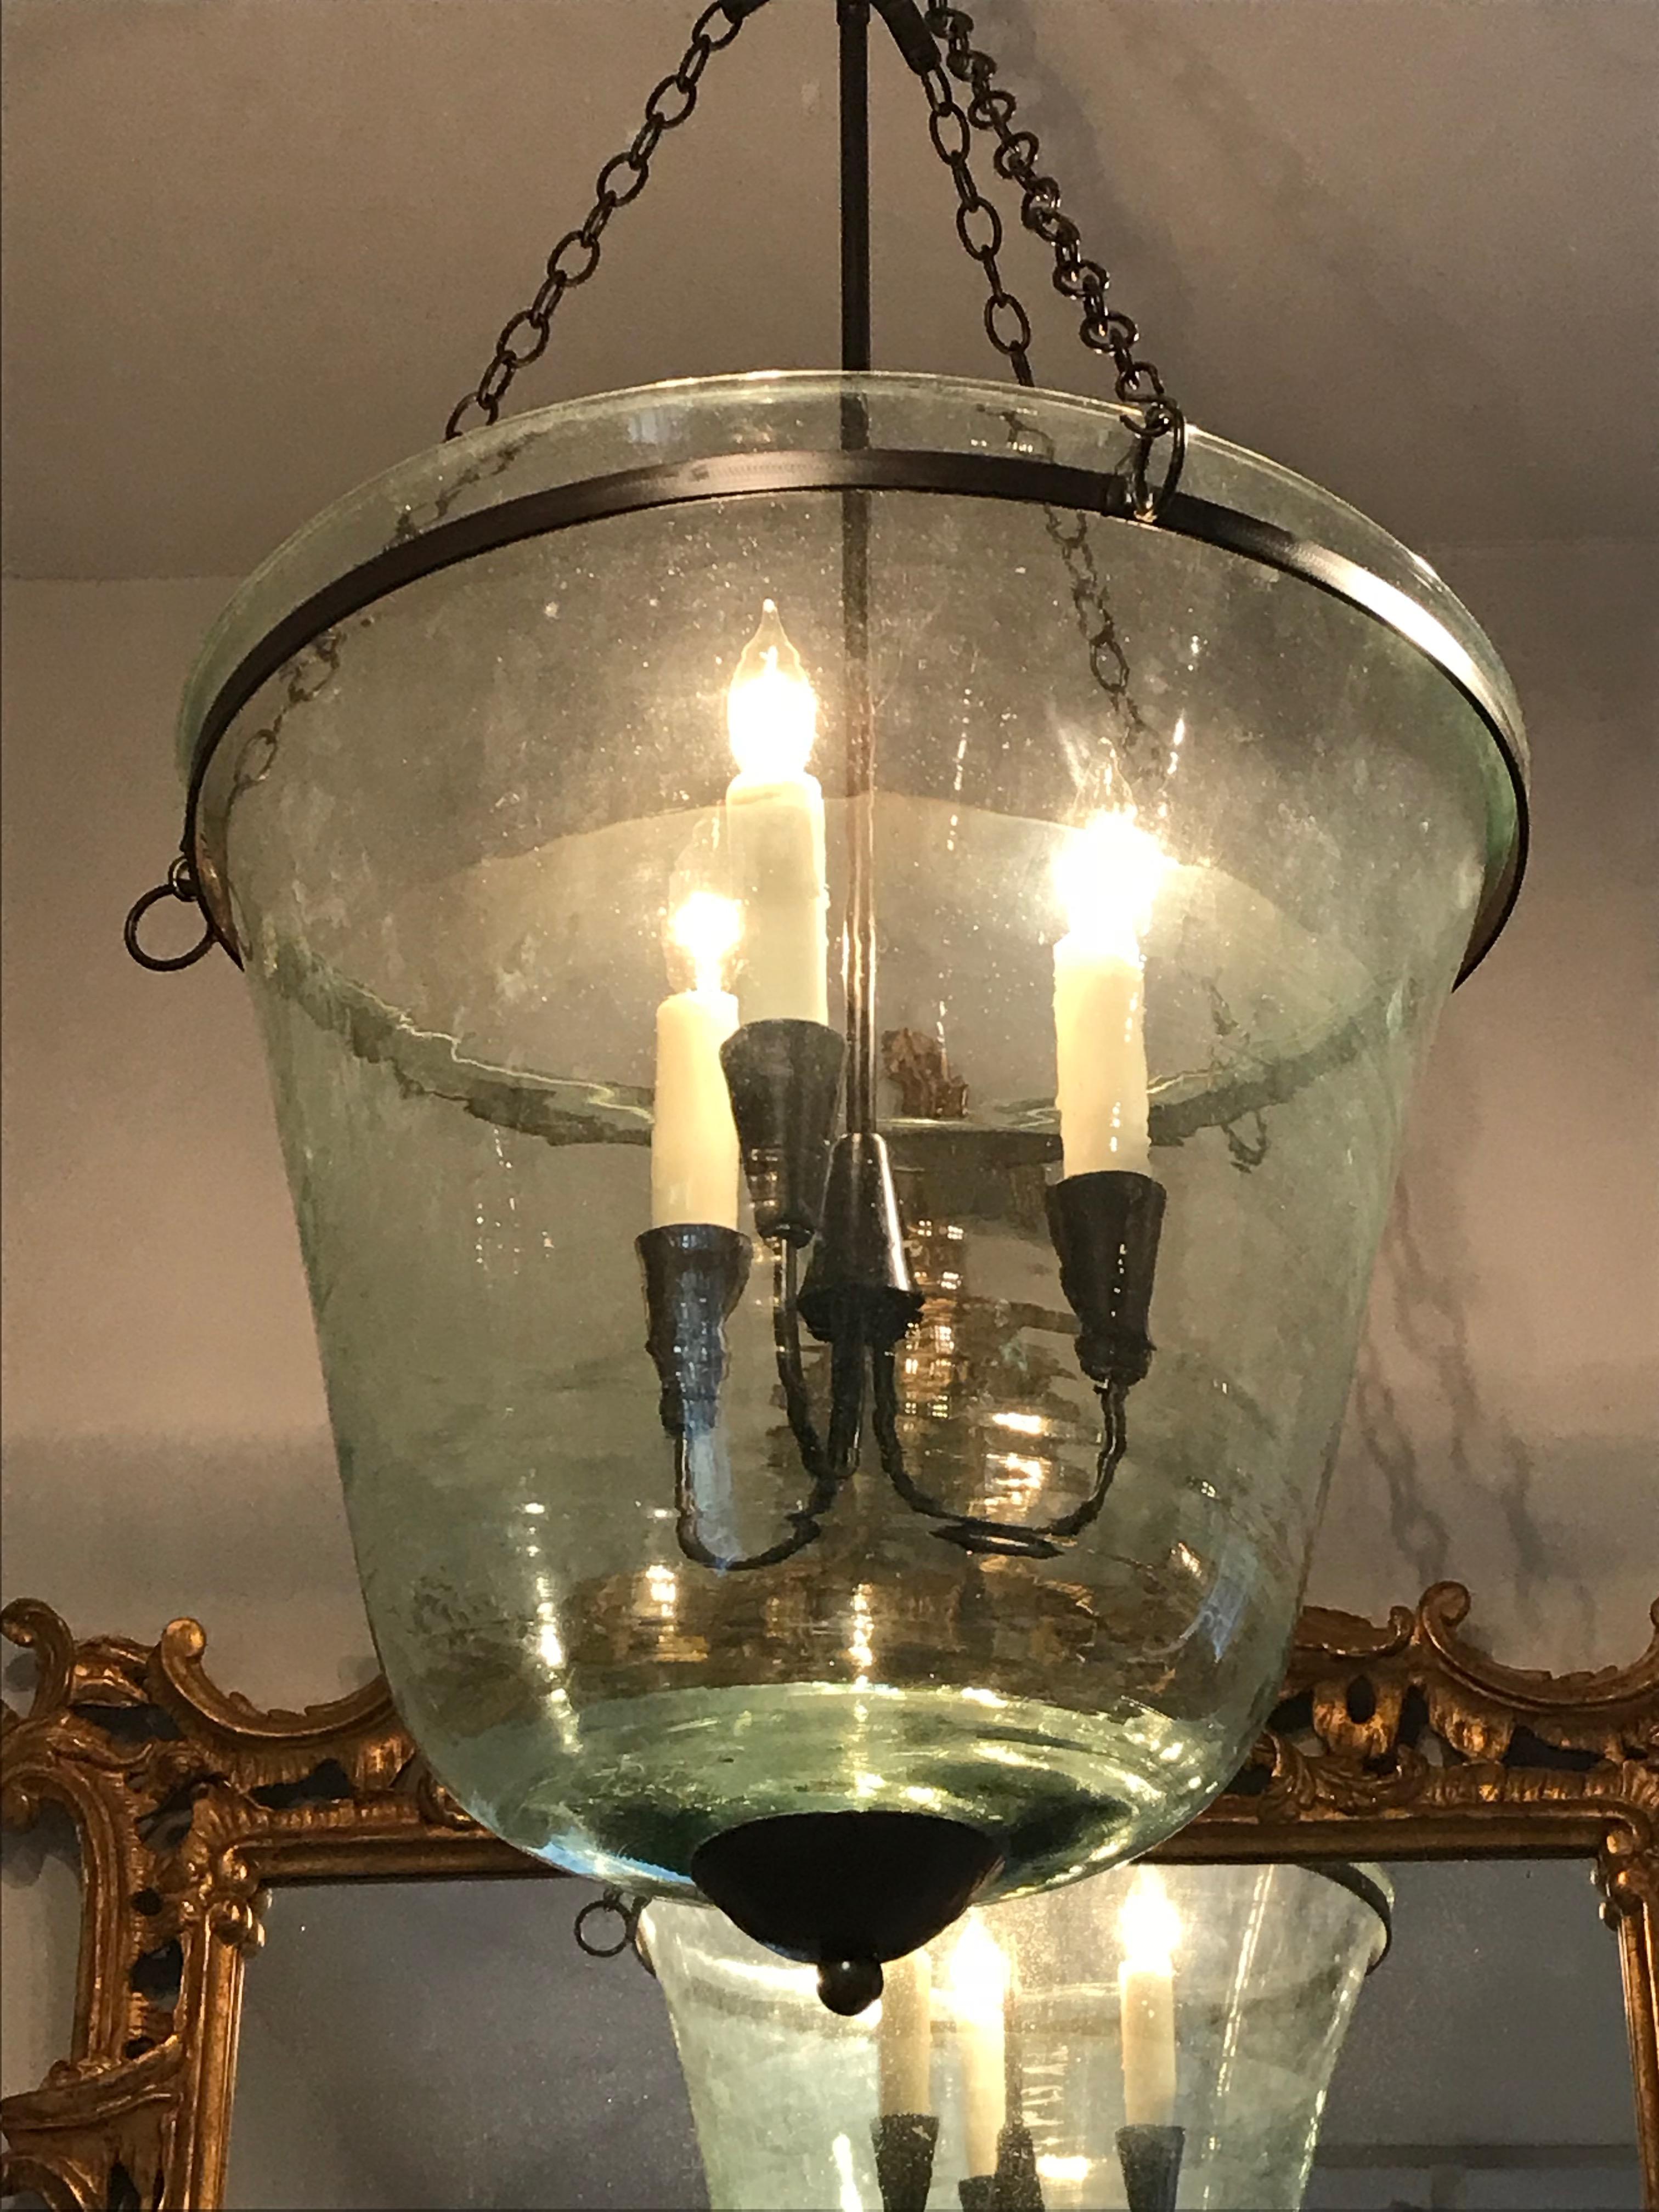 We have always had a thing for hand-blown French garden cloches that come in two configurations, bell form and melon form. This one is a bell cloche (a little taller and more narrow than a melon cloche) and it has been converted into a hanging light